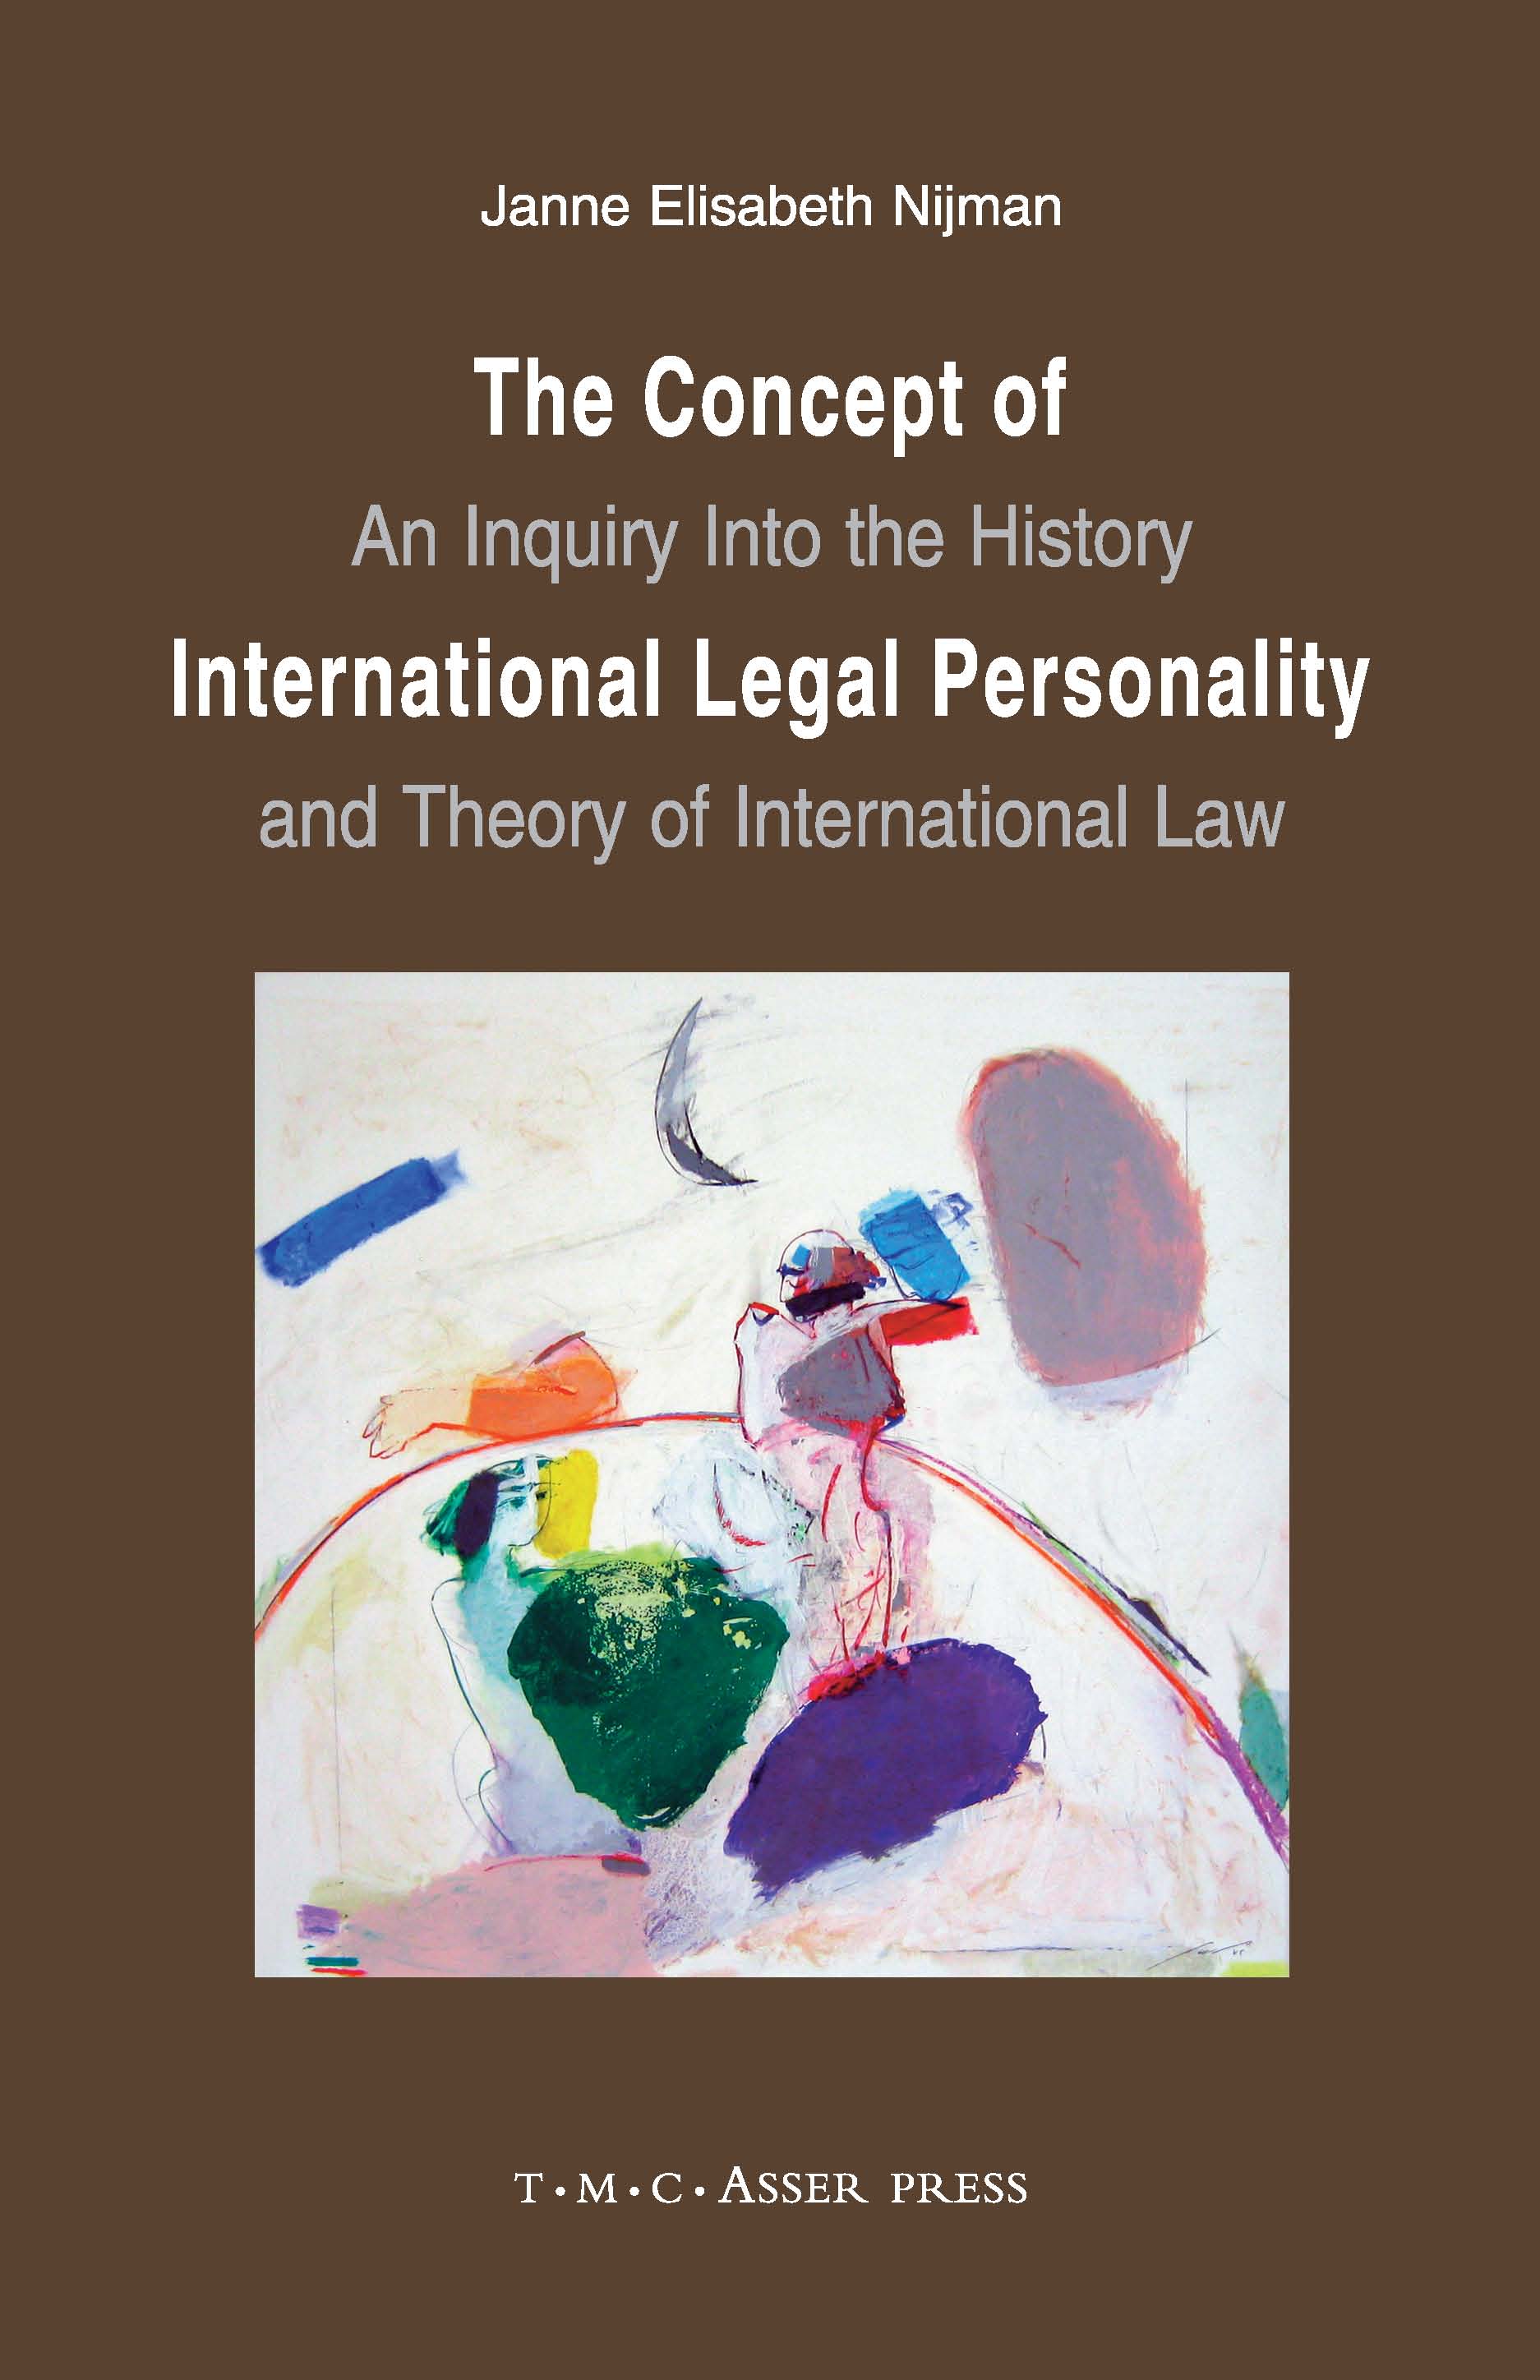 The Concept of International Legal Personality - An Inquiry into the History and Theory of International Law